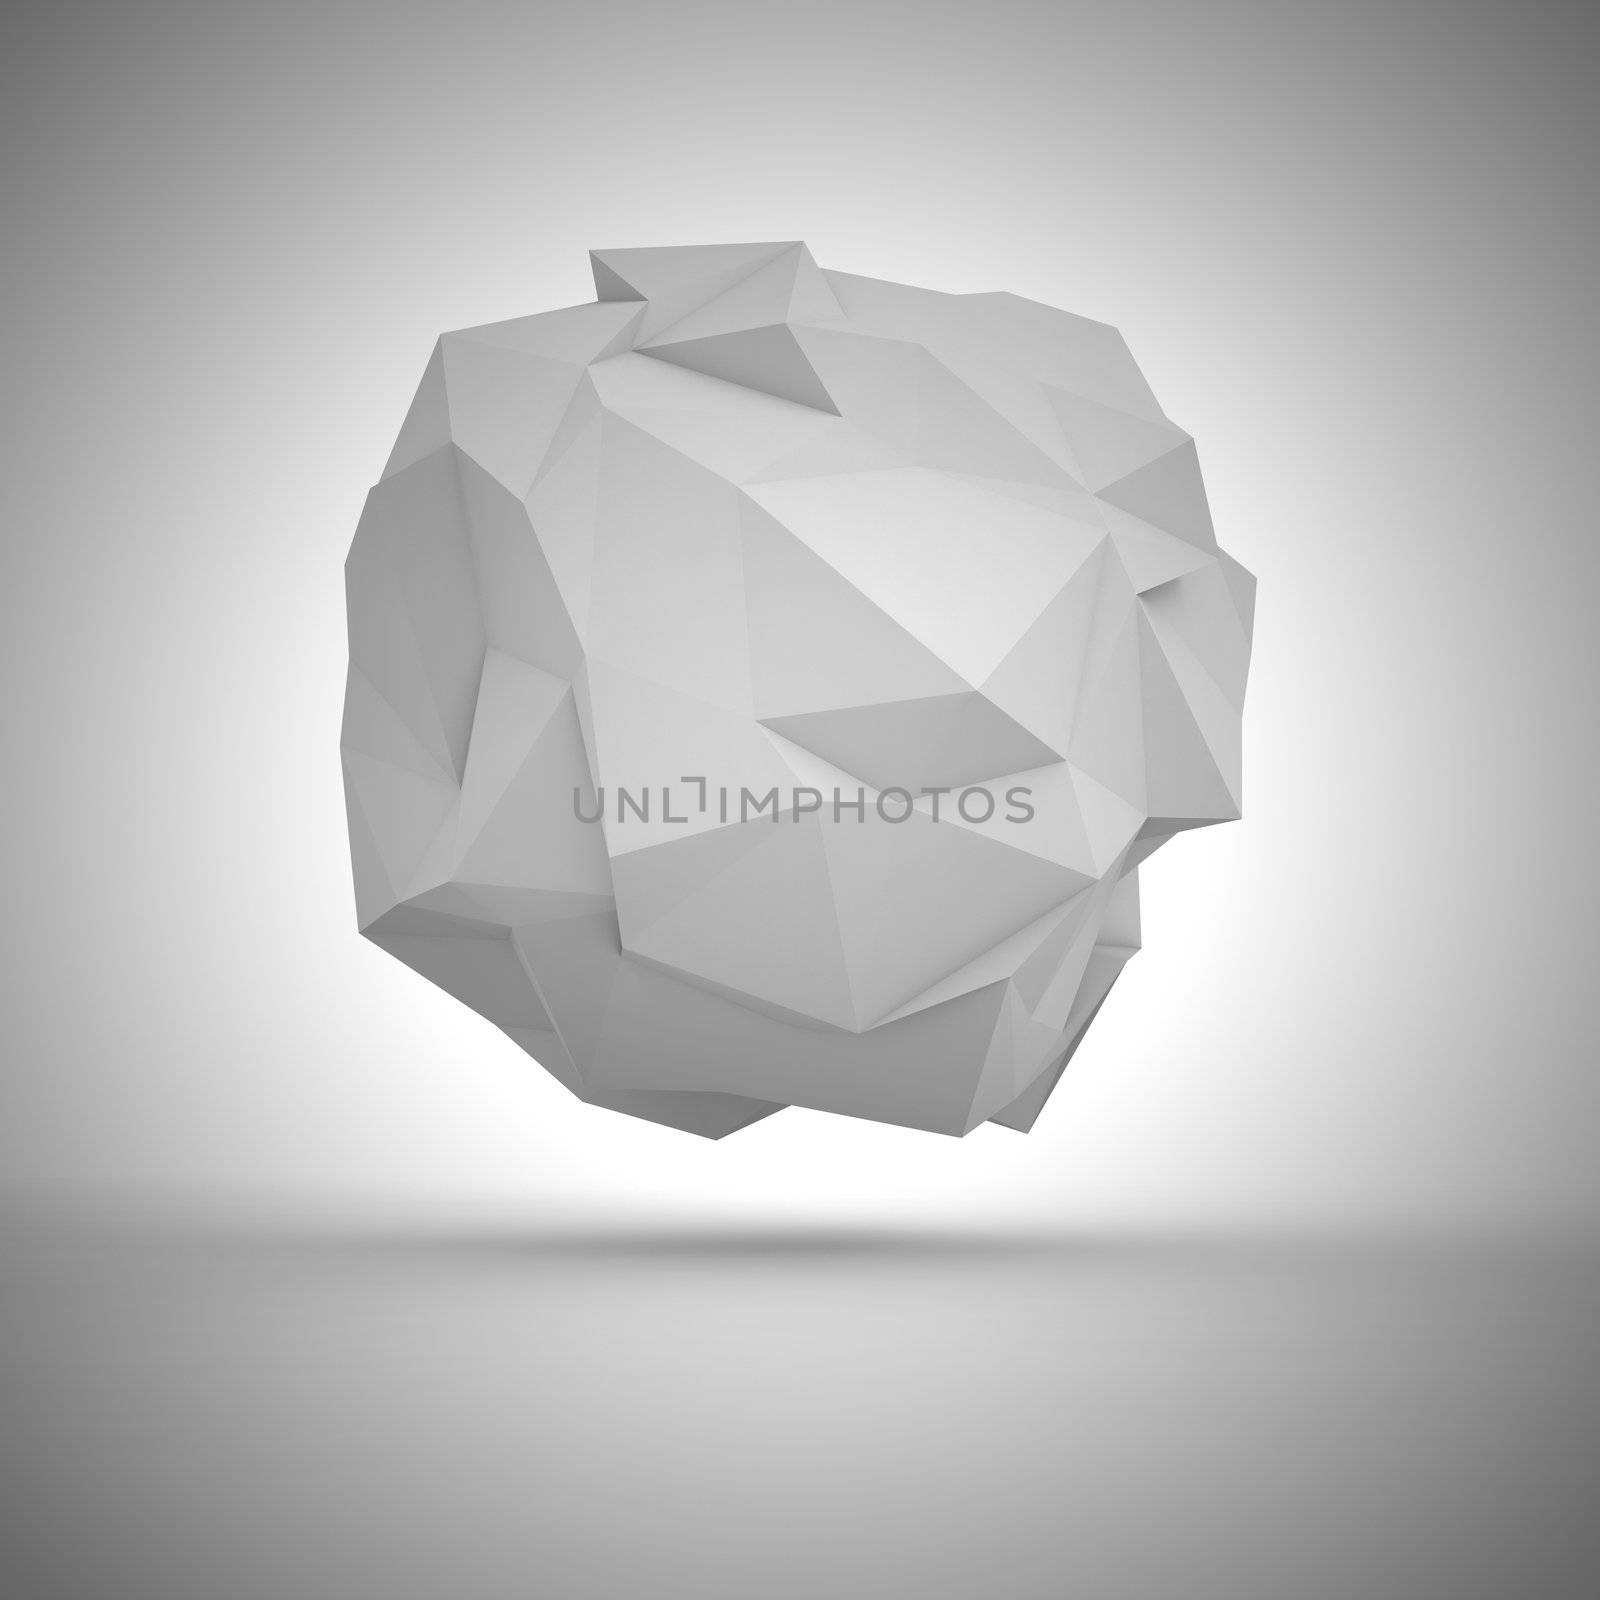 Geometric abstraction - big white crumpled sphere